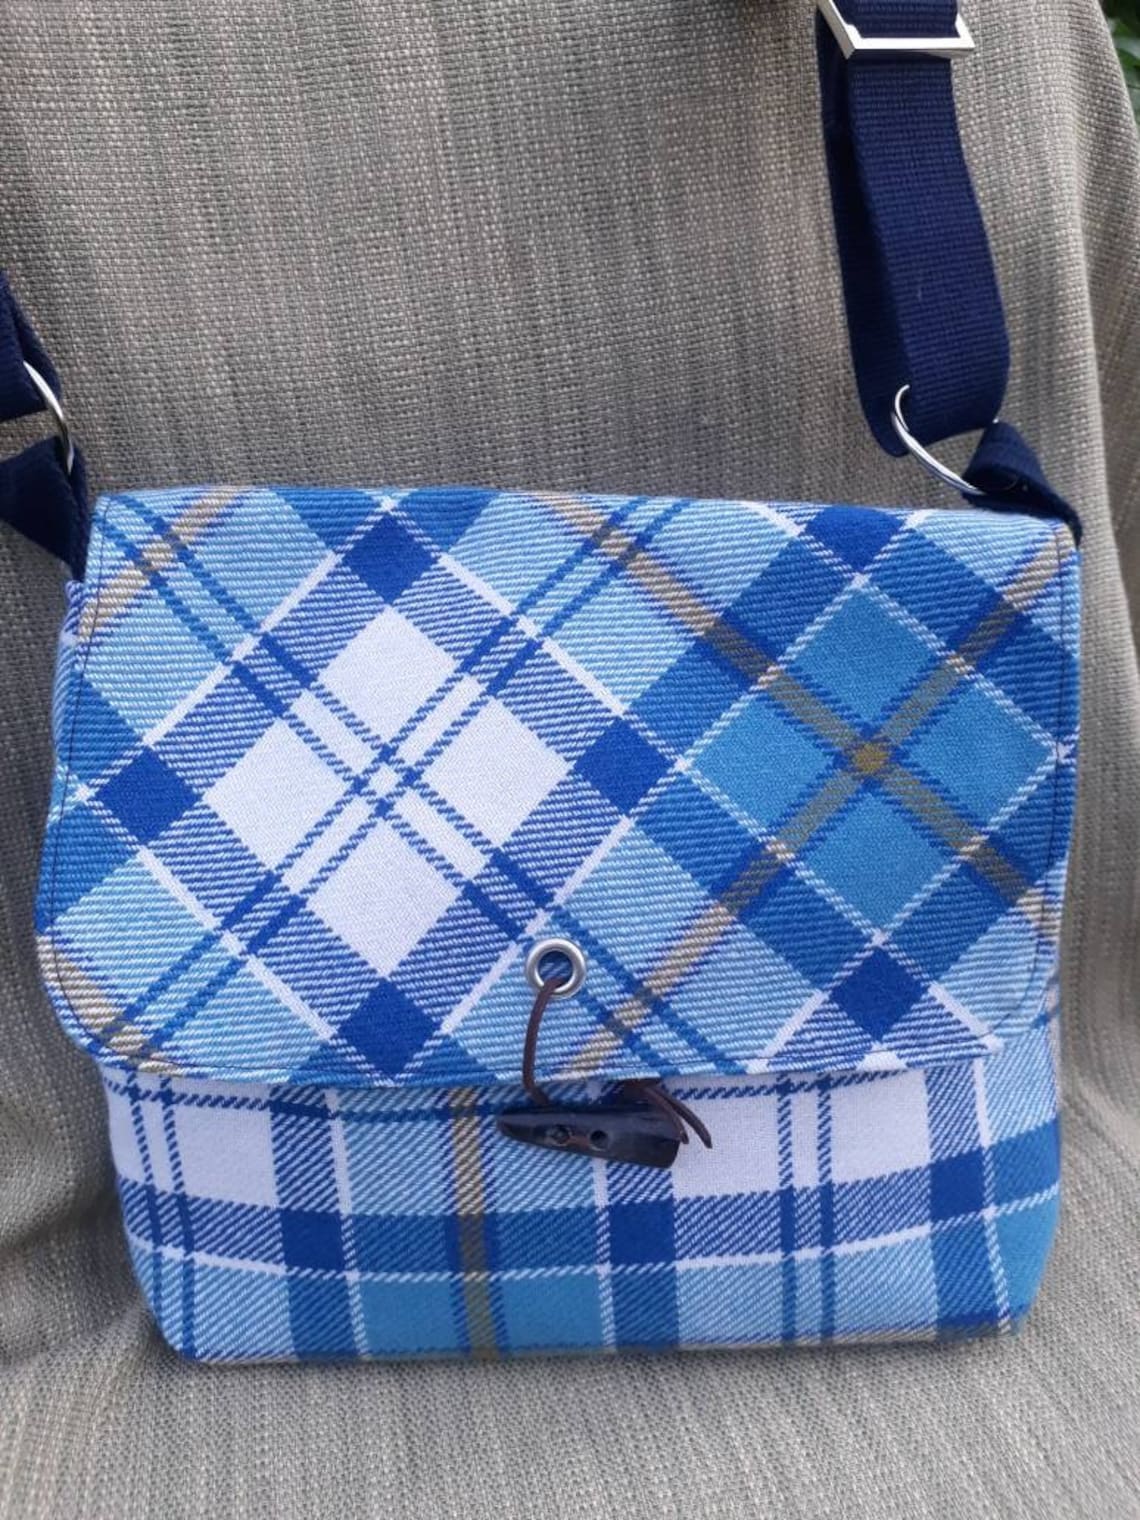 Tartan shoulder bag. Made from recycled kilt fabric. | Etsy